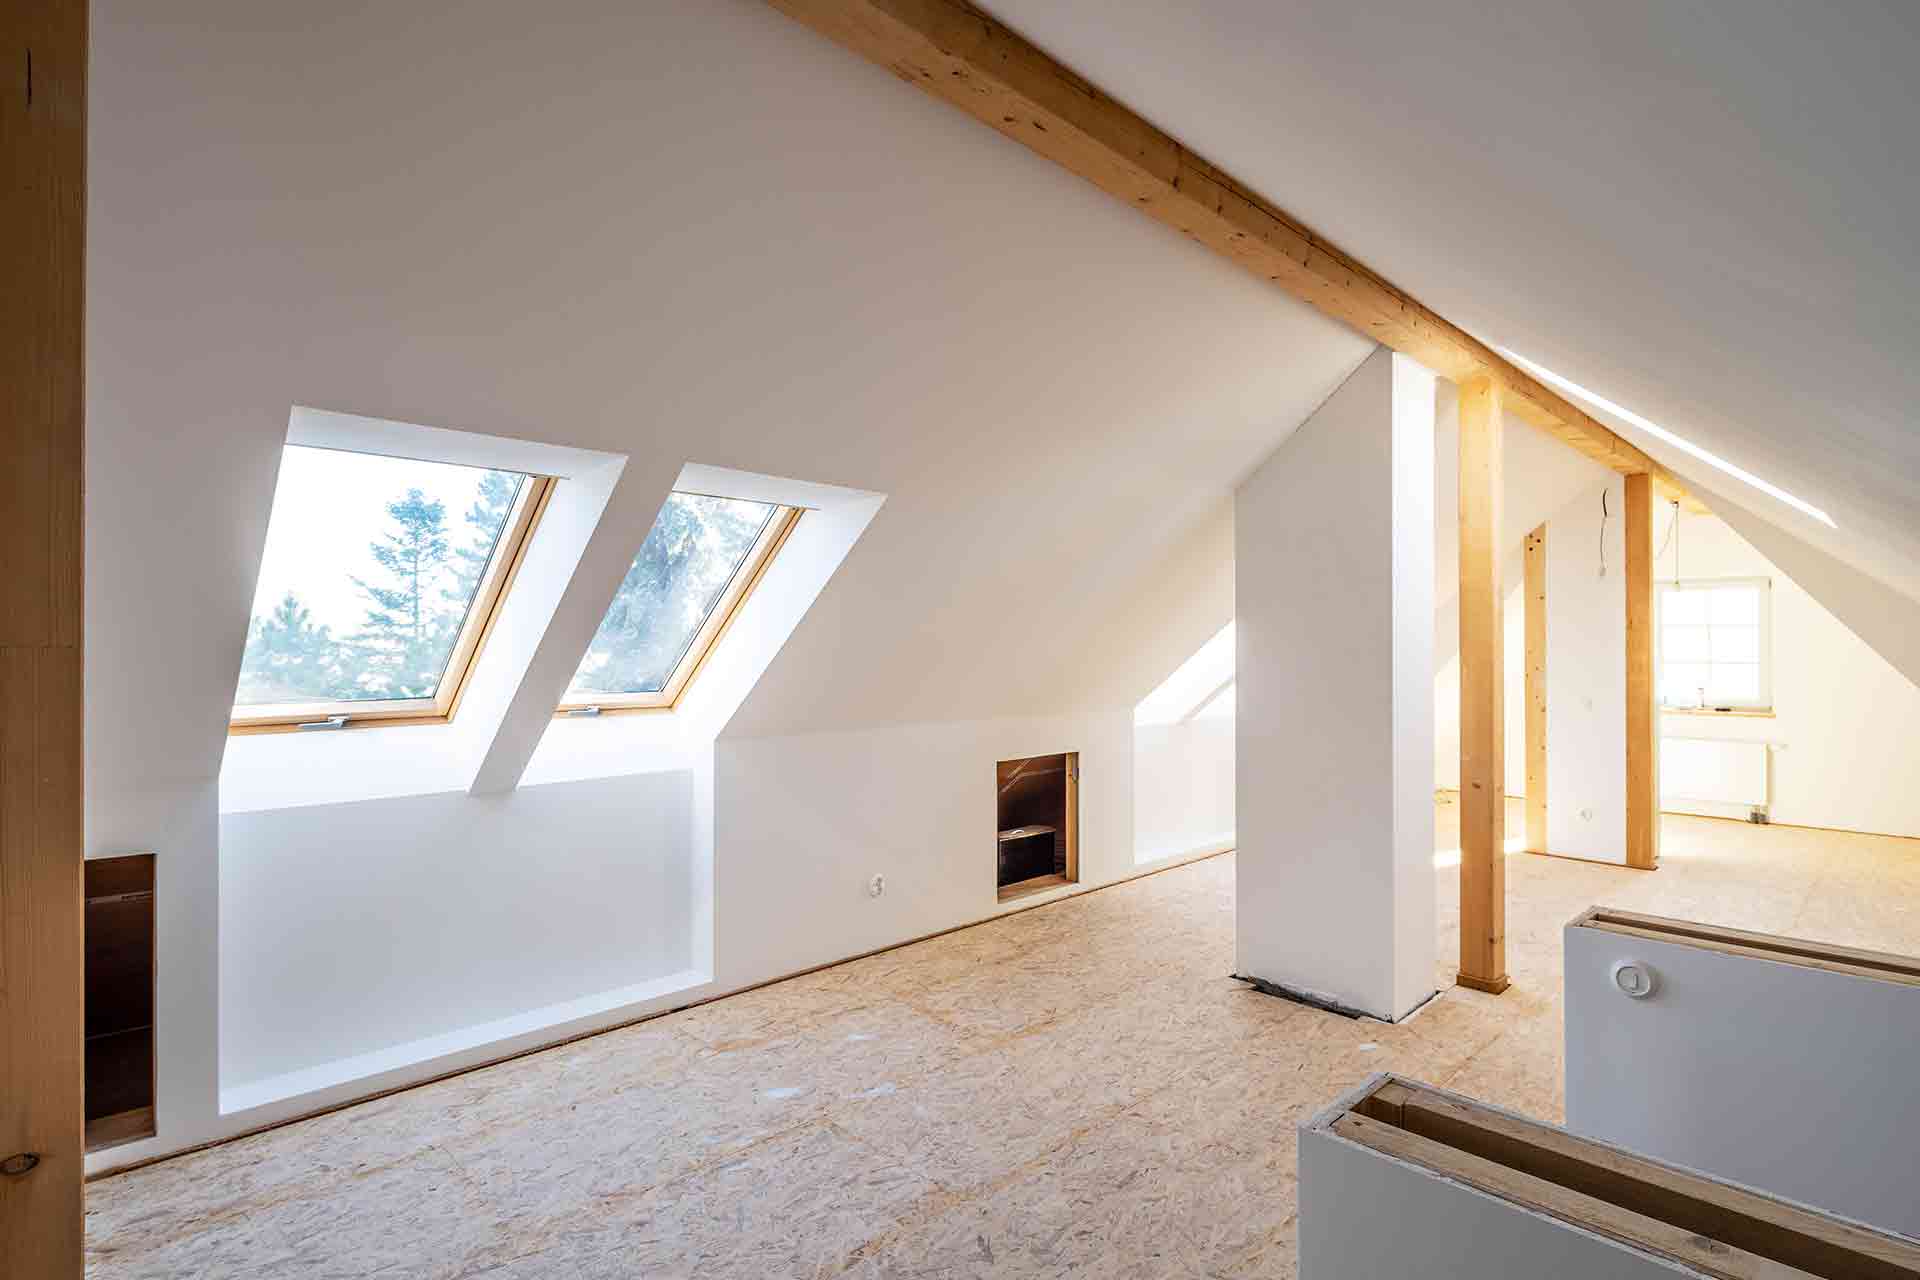 Loft Conversion Or Extension – All You Need To Know | Checkatrade